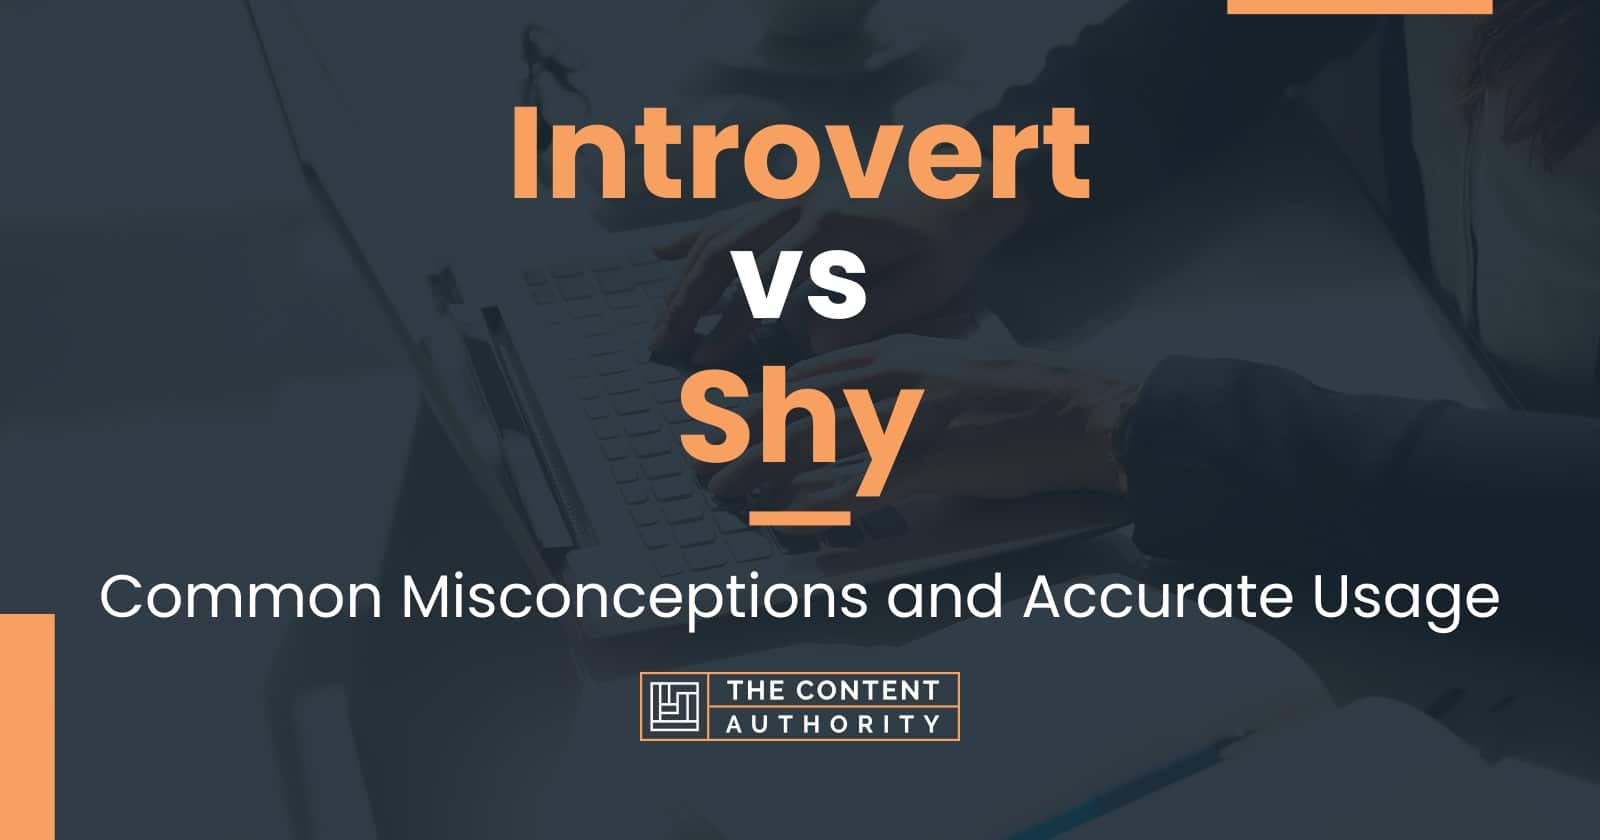 Introvert vs Shy Common Misconceptions and Accurate Usage